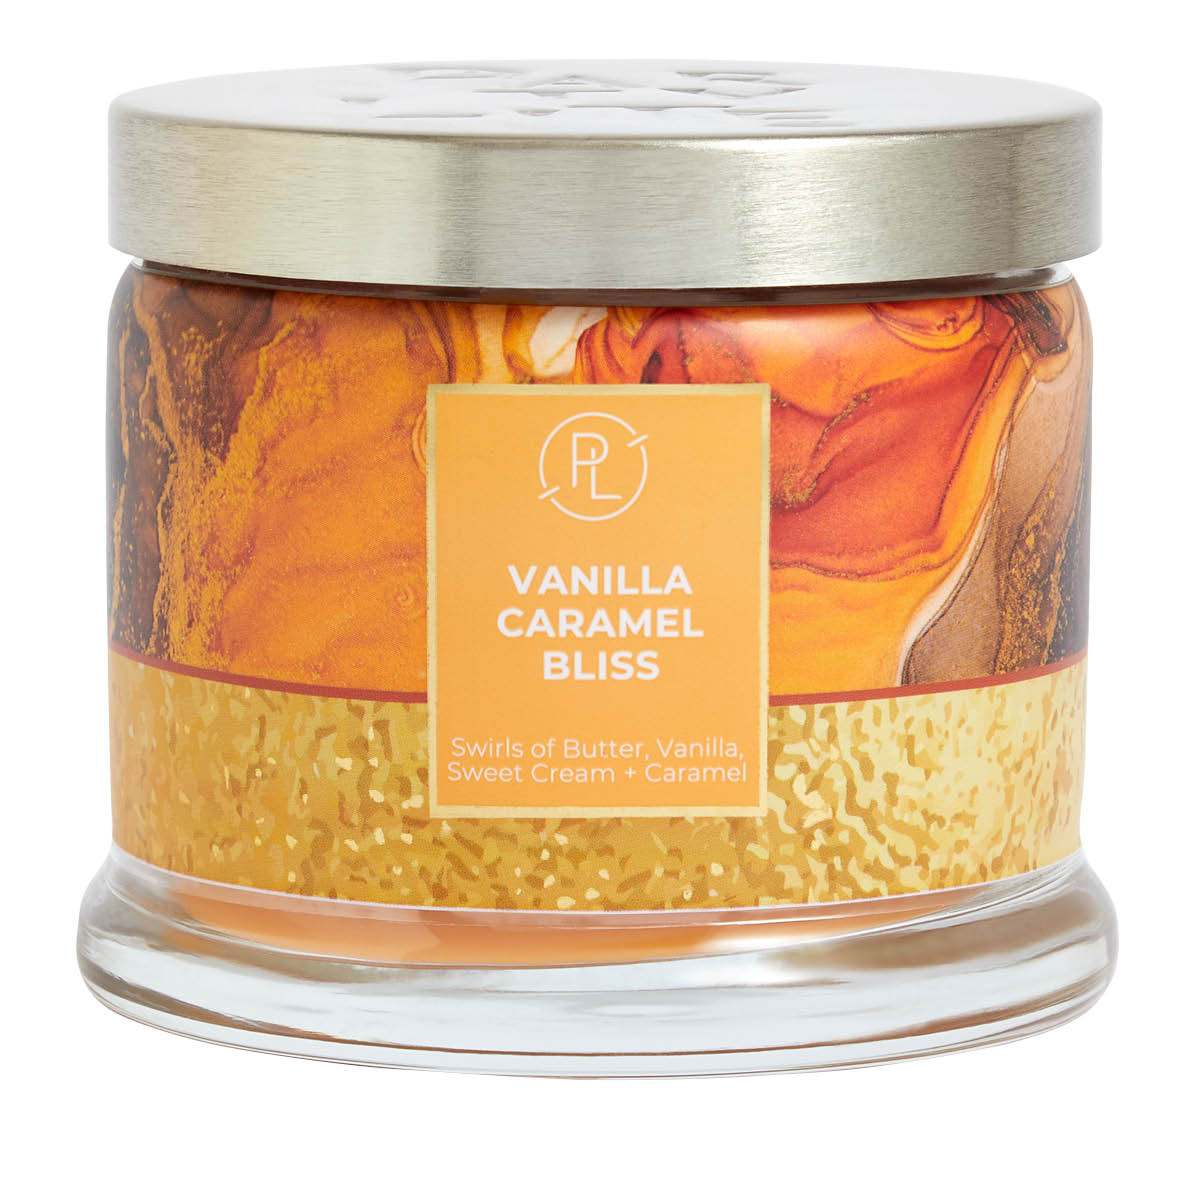 Vanilla Caramel Bliss 3-Wick Jar Candle - PartyLite US